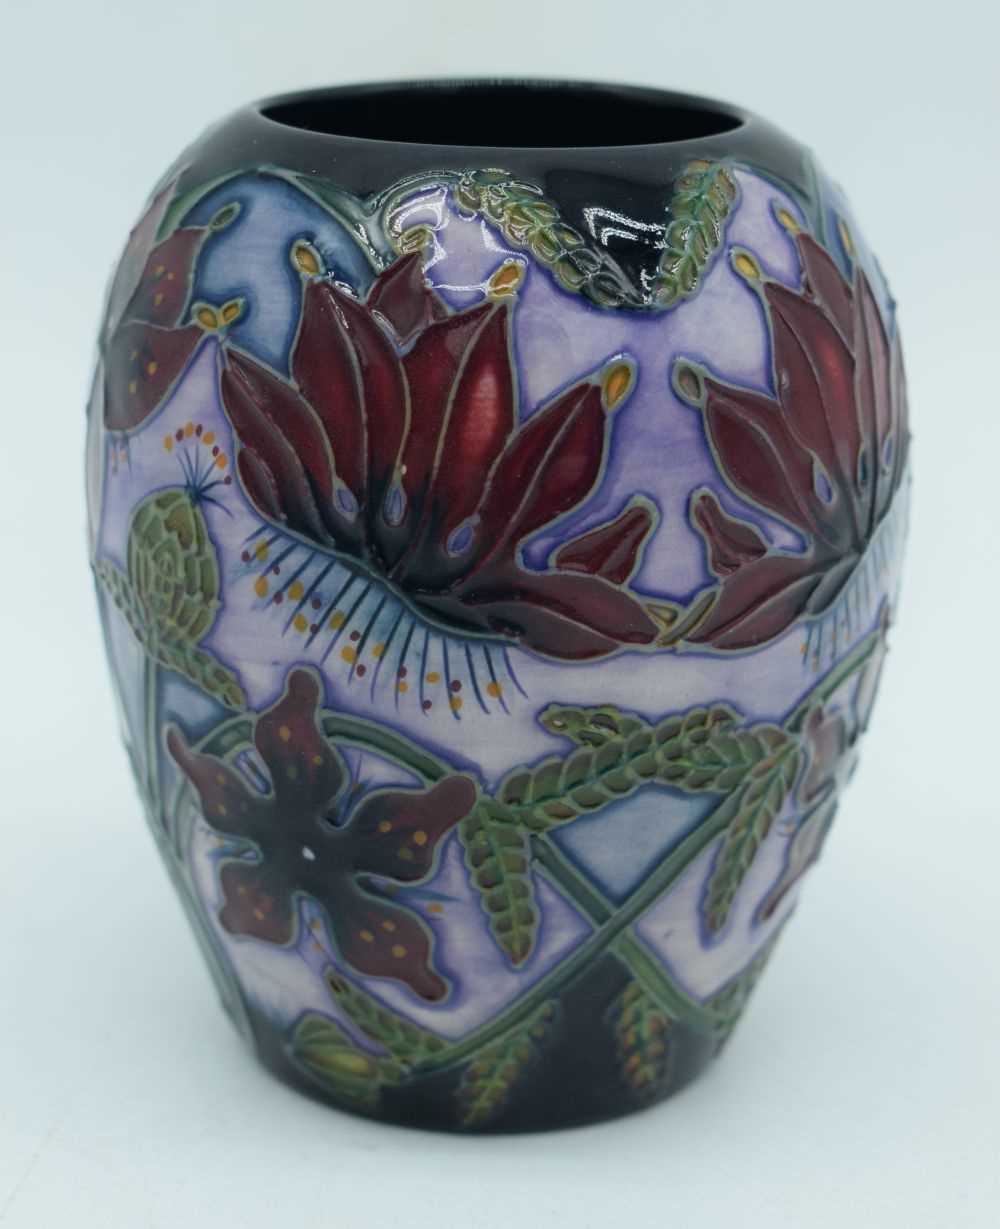 Moorcroft Pottery Vase in the Delonix Pattern, Designed by Shirley Hayes 2003. 9 x 7cm - Image 3 of 8